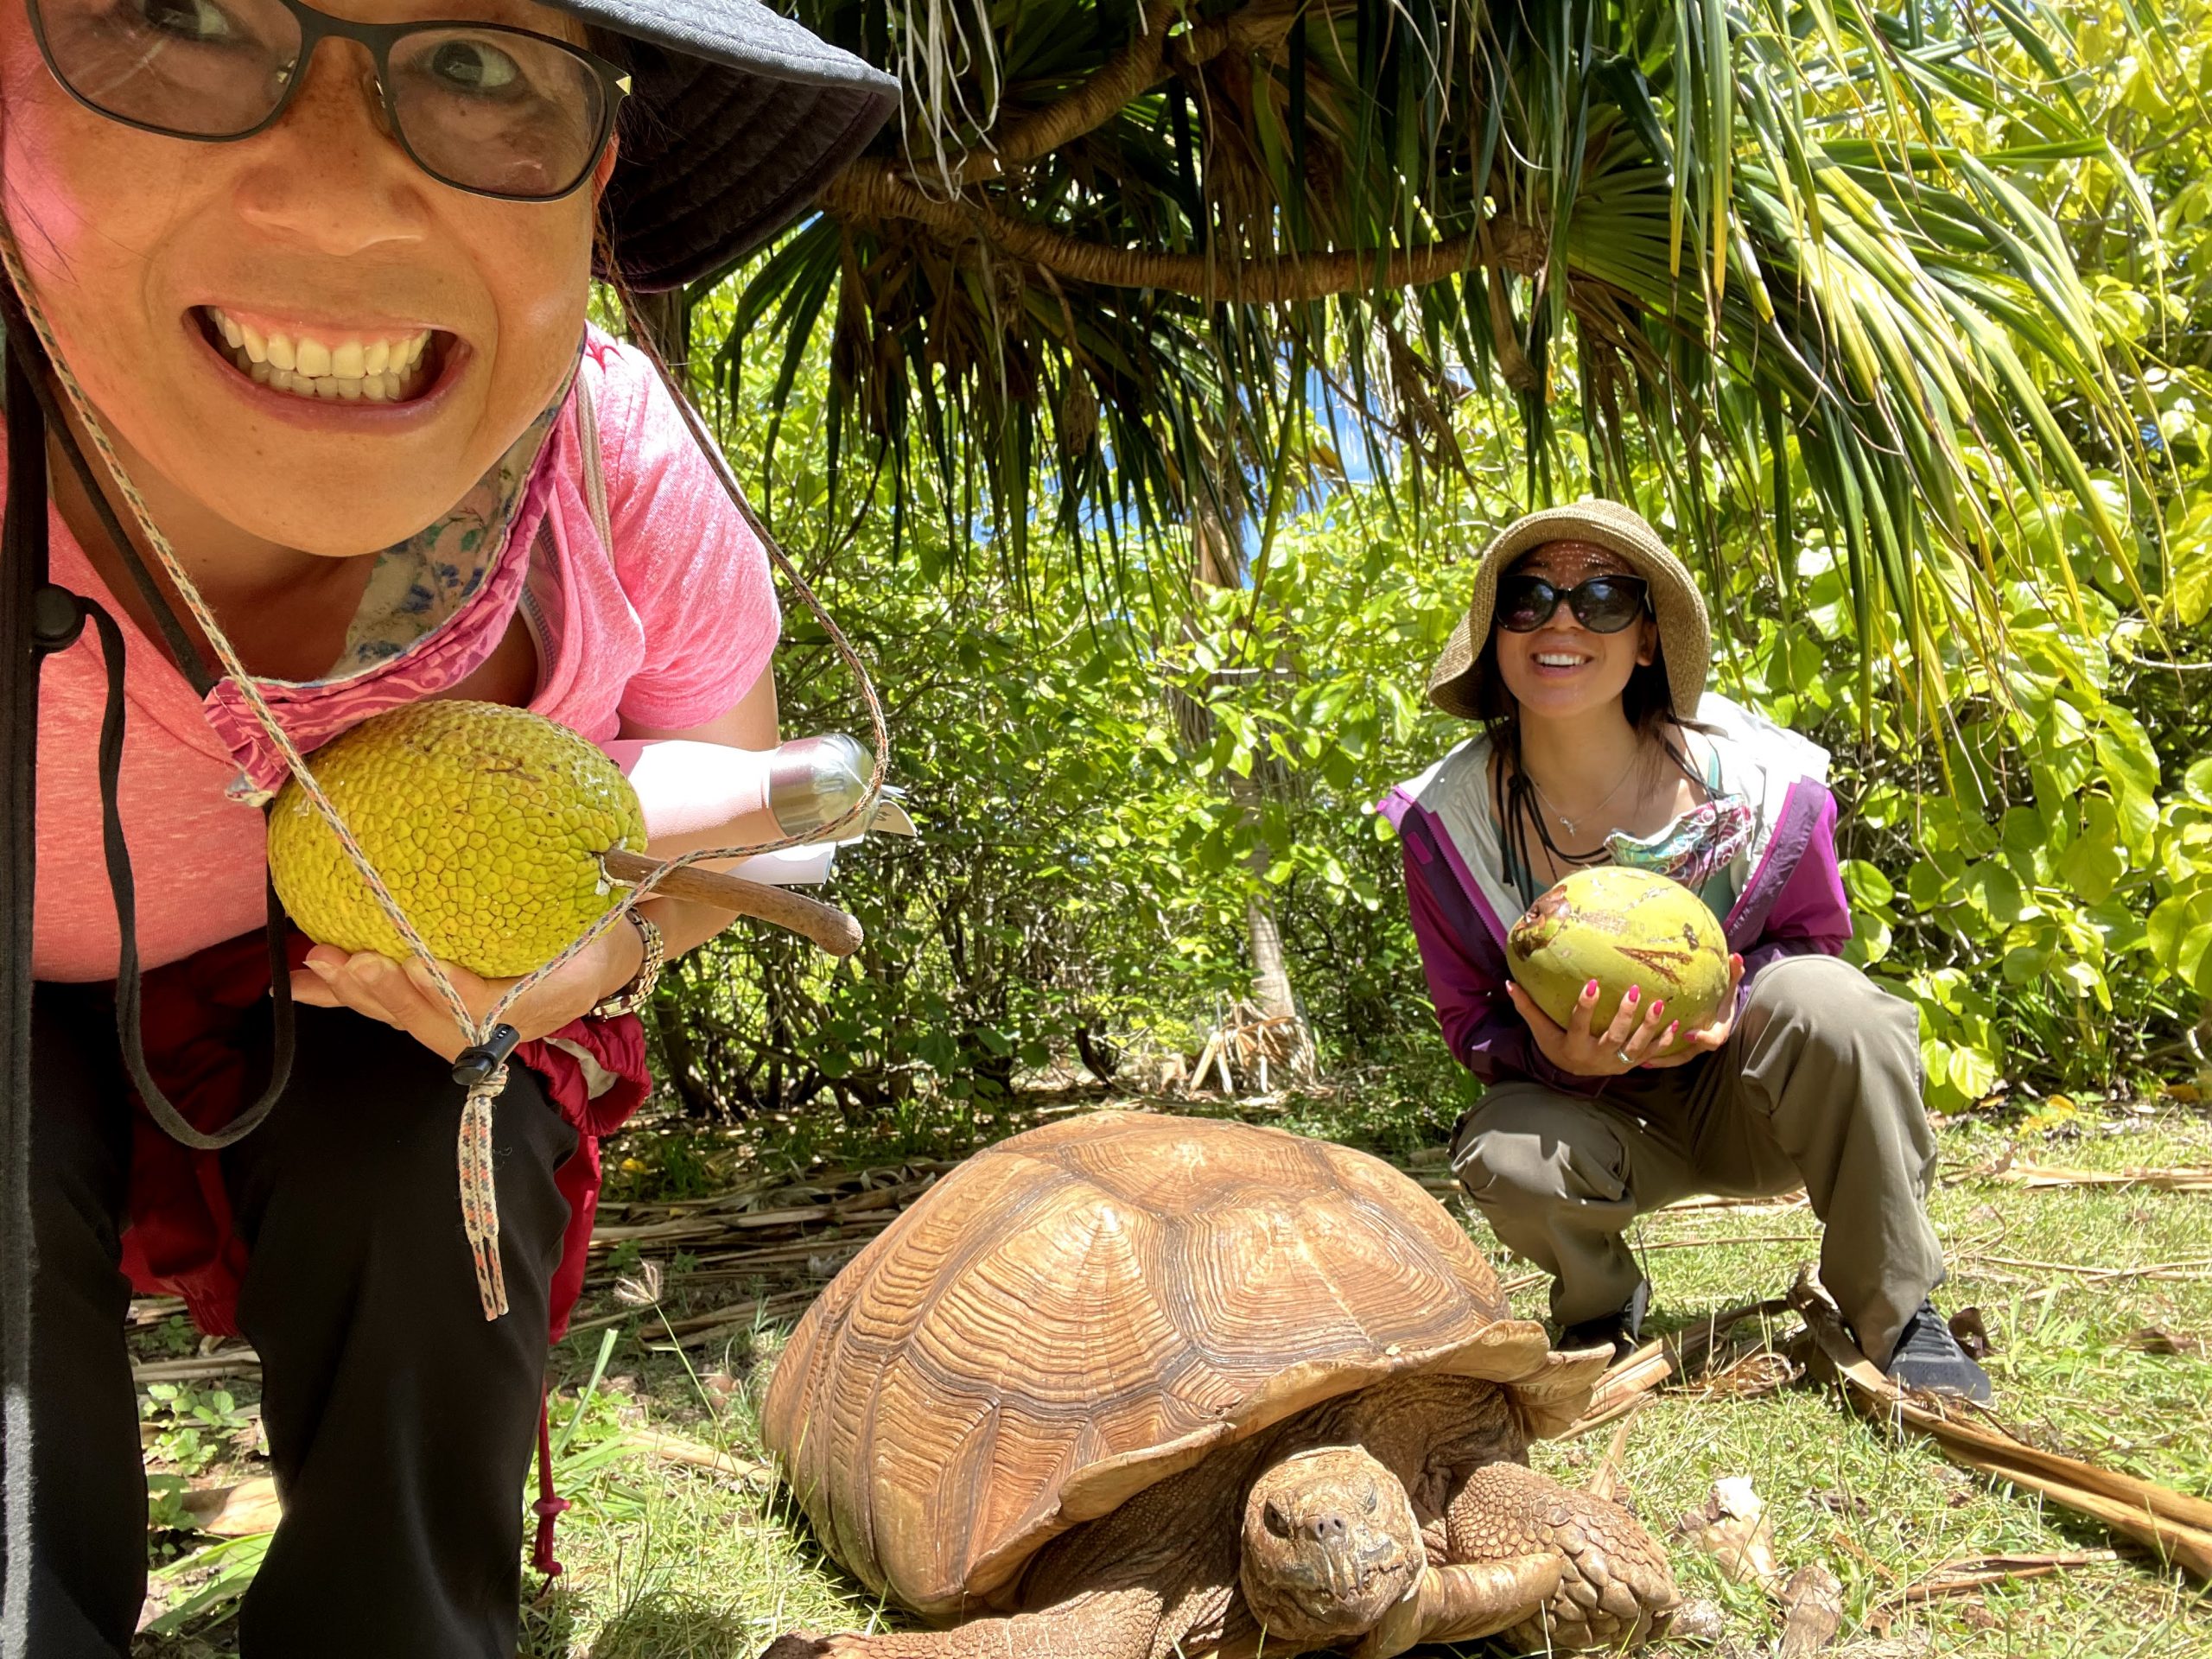 Finding coconuts and breadfruit at tortoise sanctuary